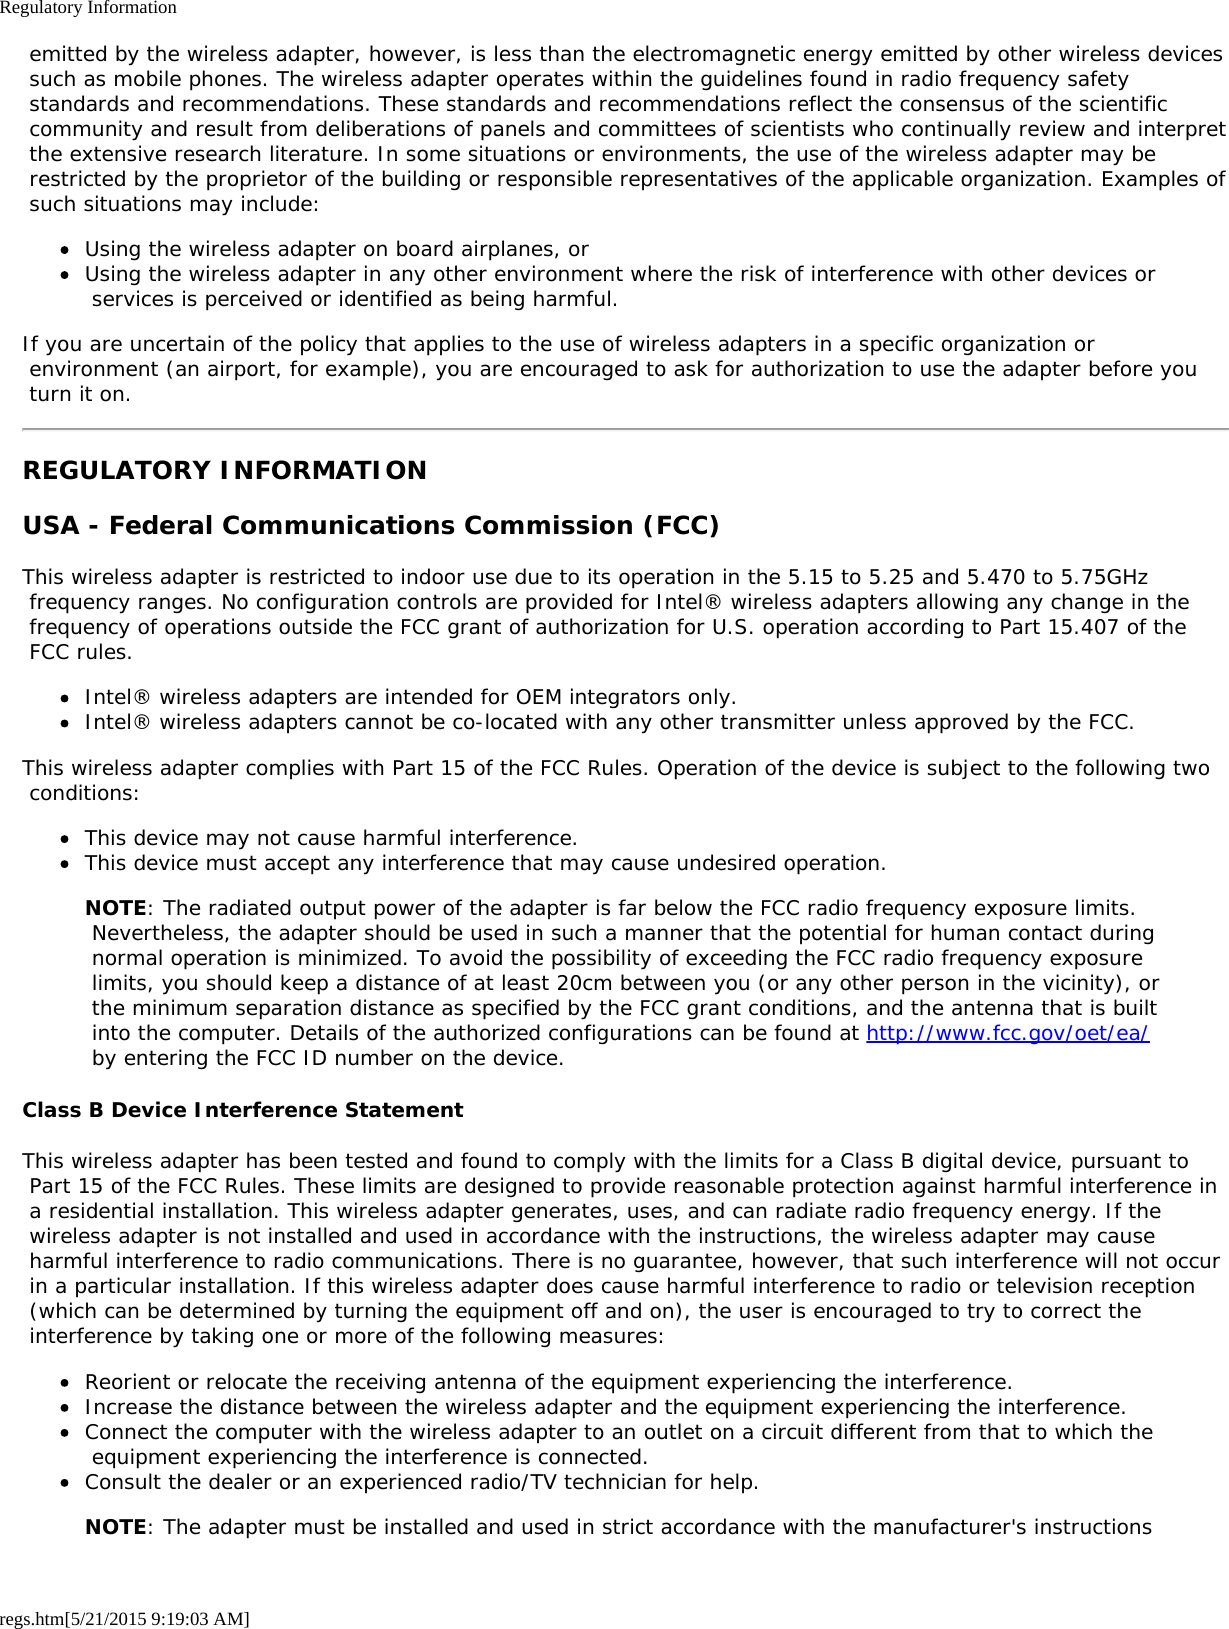 Regulatory Informationregs.htm[5/21/2015 9:19:03 AM] emitted by the wireless adapter, however, is less than the electromagnetic energy emitted by other wireless devices such as mobile phones. The wireless adapter operates within the guidelines found in radio frequency safety standards and recommendations. These standards and recommendations reflect the consensus of the scientific community and result from deliberations of panels and committees of scientists who continually review and interpret the extensive research literature. In some situations or environments, the use of the wireless adapter may be restricted by the proprietor of the building or responsible representatives of the applicable organization. Examples of such situations may include:Using the wireless adapter on board airplanes, orUsing the wireless adapter in any other environment where the risk of interference with other devices or services is perceived or identified as being harmful.If you are uncertain of the policy that applies to the use of wireless adapters in a specific organization or environment (an airport, for example), you are encouraged to ask for authorization to use the adapter before you turn it on.REGULATORY INFORMATIONUSA - Federal Communications Commission (FCC)This wireless adapter is restricted to indoor use due to its operation in the 5.15 to 5.25 and 5.470 to 5.75GHz frequency ranges. No configuration controls are provided for Intel® wireless adapters allowing any change in the frequency of operations outside the FCC grant of authorization for U.S. operation according to Part 15.407 of the FCC rules.Intel® wireless adapters are intended for OEM integrators only.Intel® wireless adapters cannot be co-located with any other transmitter unless approved by the FCC.This wireless adapter complies with Part 15 of the FCC Rules. Operation of the device is subject to the following two conditions:This device may not cause harmful interference.This device must accept any interference that may cause undesired operation.NOTE: The radiated output power of the adapter is far below the FCC radio frequency exposure limits. Nevertheless, the adapter should be used in such a manner that the potential for human contact during normal operation is minimized. To avoid the possibility of exceeding the FCC radio frequency exposure limits, you should keep a distance of at least 20cm between you (or any other person in the vicinity), or the minimum separation distance as specified by the FCC grant conditions, and the antenna that is built into the computer. Details of the authorized configurations can be found at http://www.fcc.gov/oet/ea/ by entering the FCC ID number on the device.Class B Device Interference StatementThis wireless adapter has been tested and found to comply with the limits for a Class B digital device, pursuant to Part 15 of the FCC Rules. These limits are designed to provide reasonable protection against harmful interference in a residential installation. This wireless adapter generates, uses, and can radiate radio frequency energy. If the wireless adapter is not installed and used in accordance with the instructions, the wireless adapter may cause harmful interference to radio communications. There is no guarantee, however, that such interference will not occur in a particular installation. If this wireless adapter does cause harmful interference to radio or television reception (which can be determined by turning the equipment off and on), the user is encouraged to try to correct the interference by taking one or more of the following measures:Reorient or relocate the receiving antenna of the equipment experiencing the interference.Increase the distance between the wireless adapter and the equipment experiencing the interference.Connect the computer with the wireless adapter to an outlet on a circuit different from that to which the equipment experiencing the interference is connected.Consult the dealer or an experienced radio/TV technician for help.NOTE: The adapter must be installed and used in strict accordance with the manufacturer&apos;s instructions